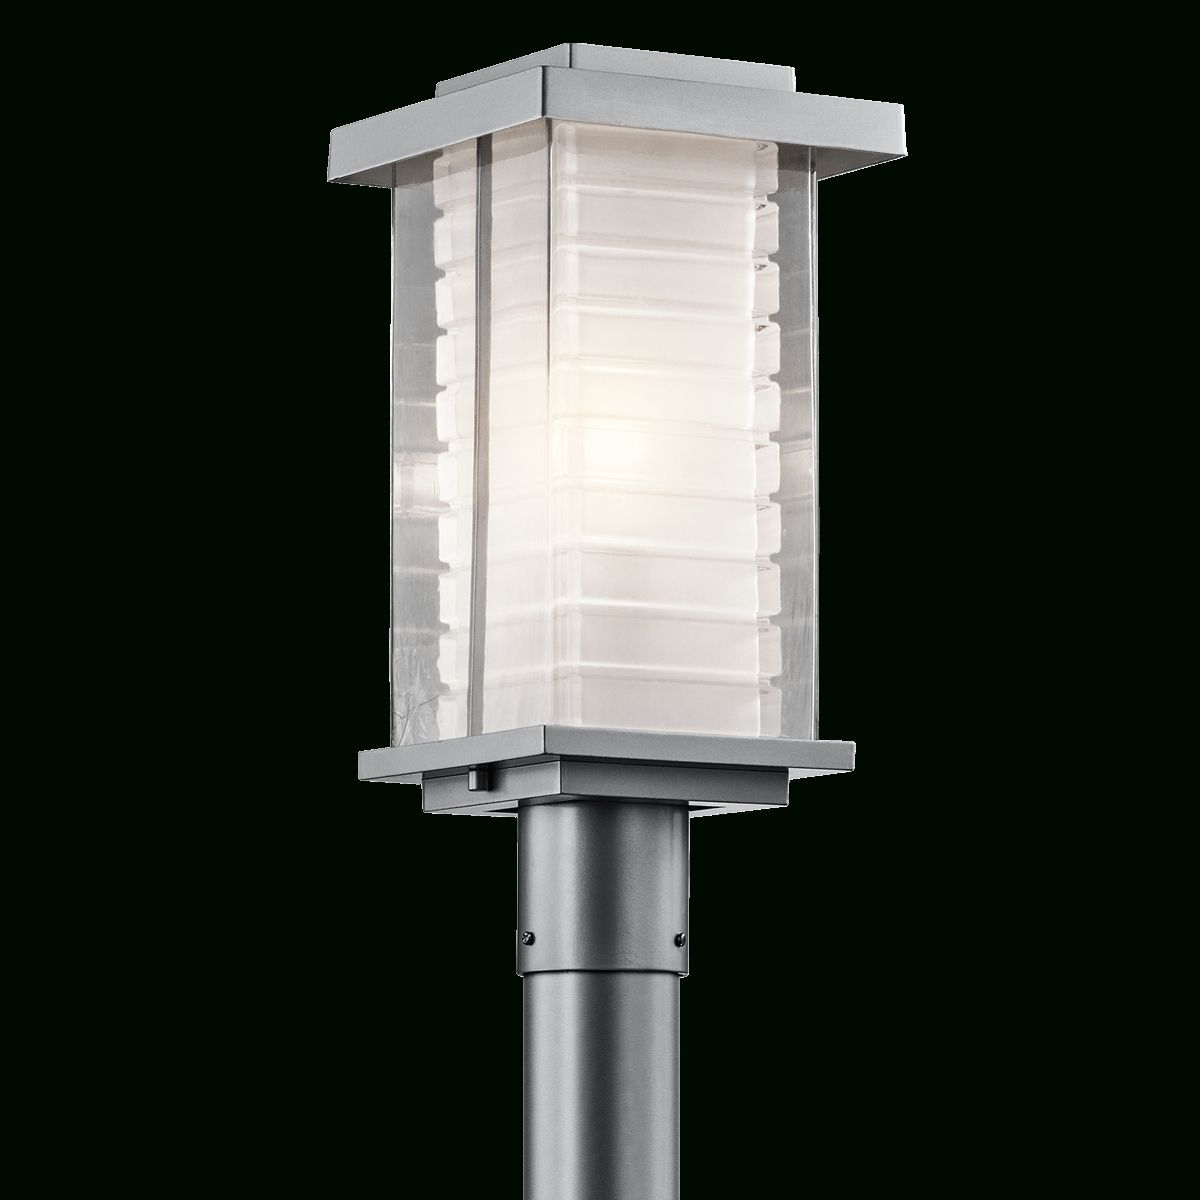 Ascari 1 Light Outdoor Post Light In Platinum | Highpoint Planning With Regard To Outdoor Lamp Lanterns (View 16 of 20)